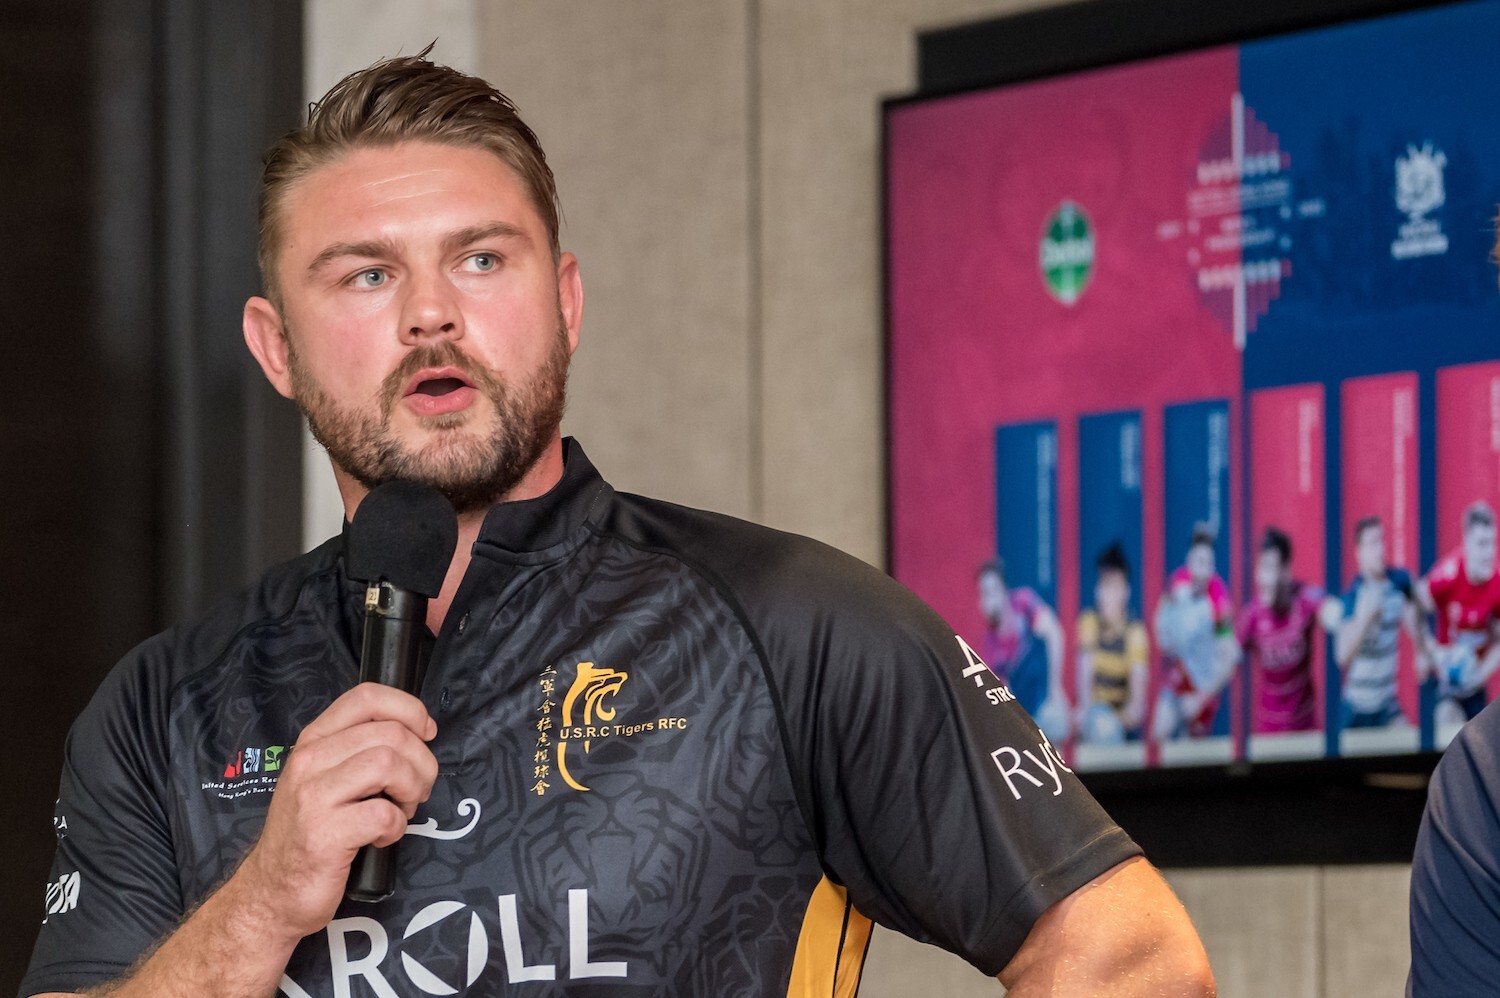 Former Dragons captain and Wales international Lewis Evans, Tigers director of rugby and head coach of the men's Premiership team, at the 2021-22 season launch in Hong Kong Football Club. Photo: Ike Images